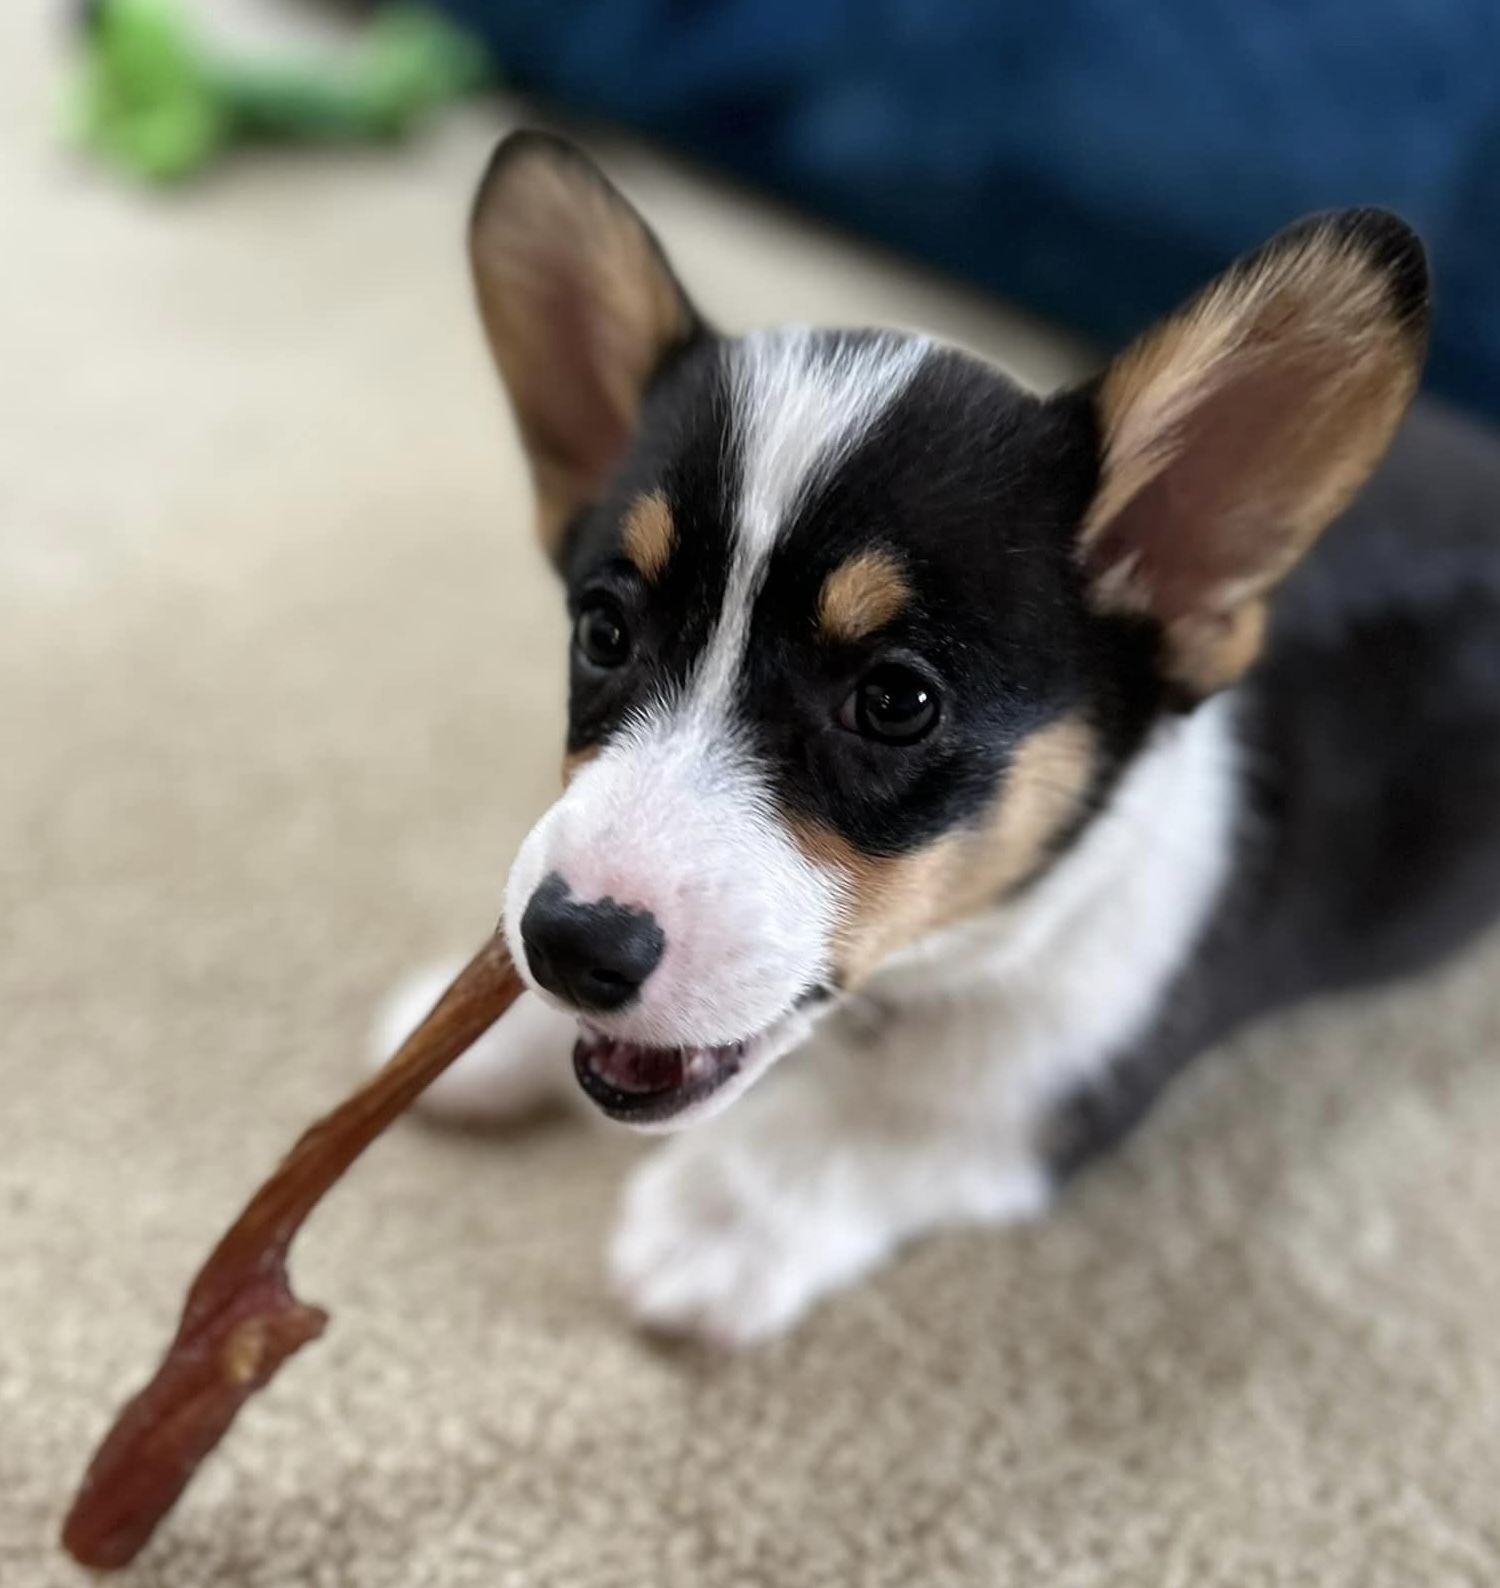 Kirby is a tiny Corgi puppy. He is chewing on a bone.